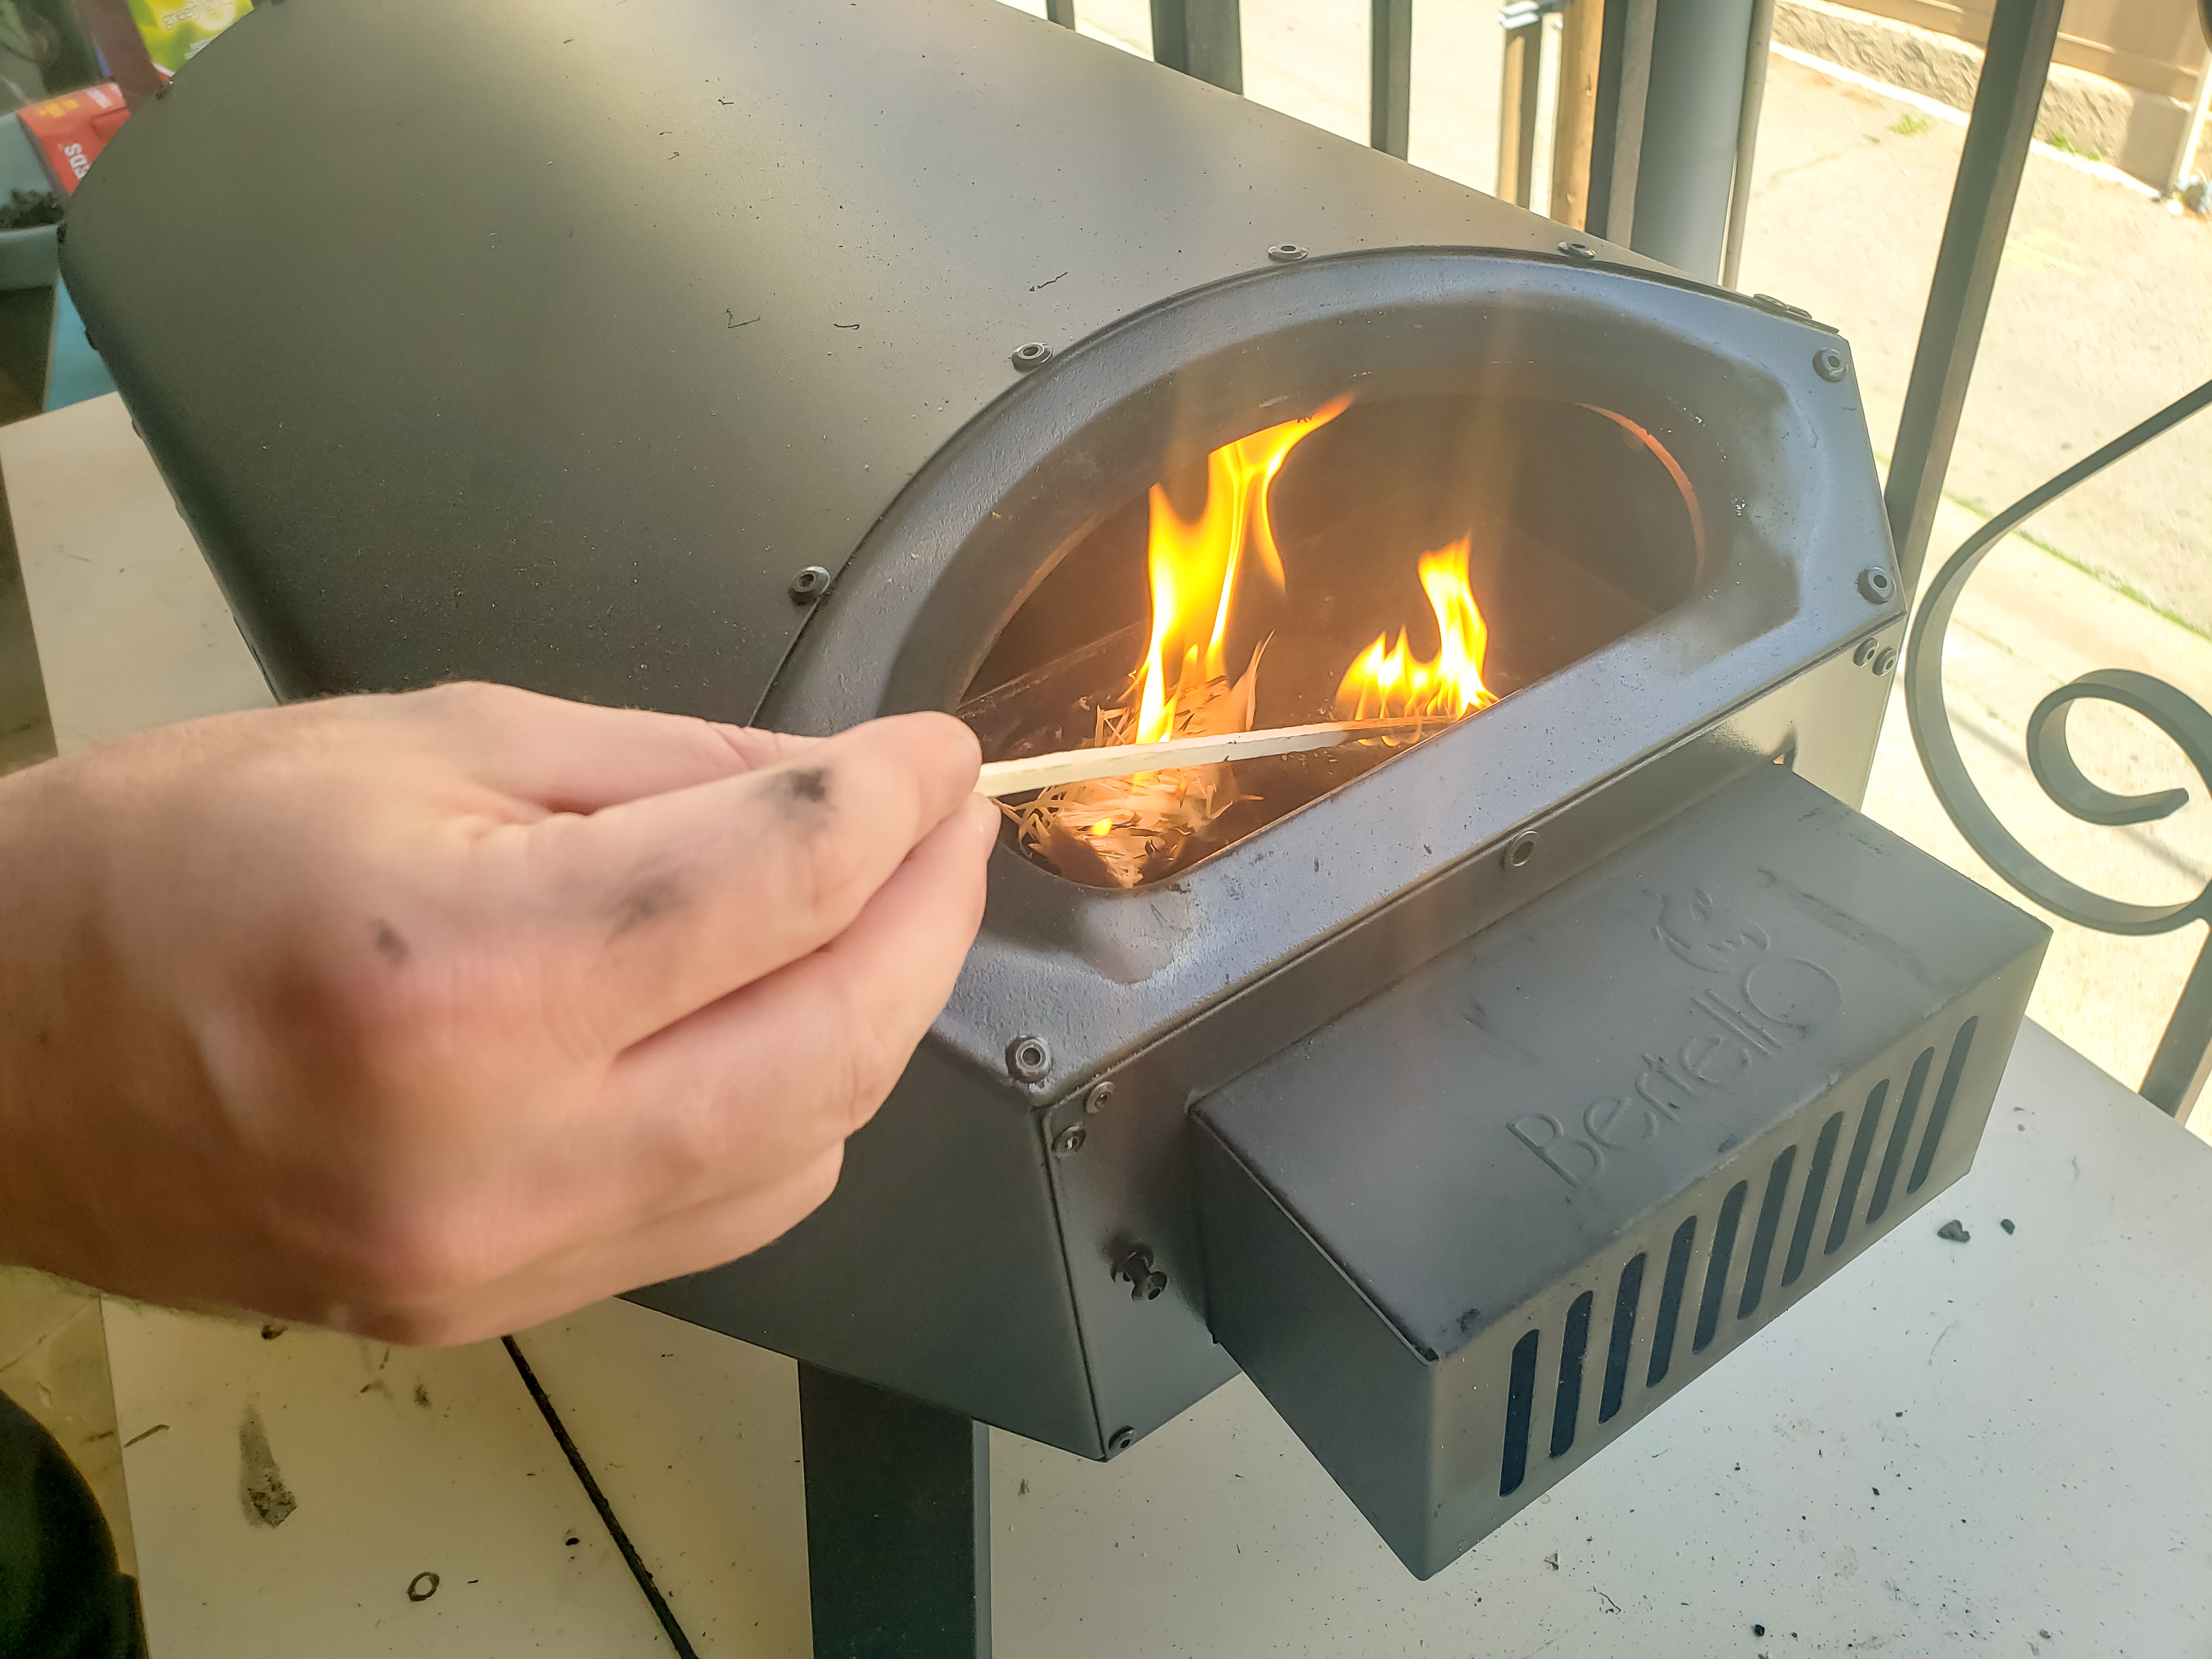 How to light fire in pizza oven